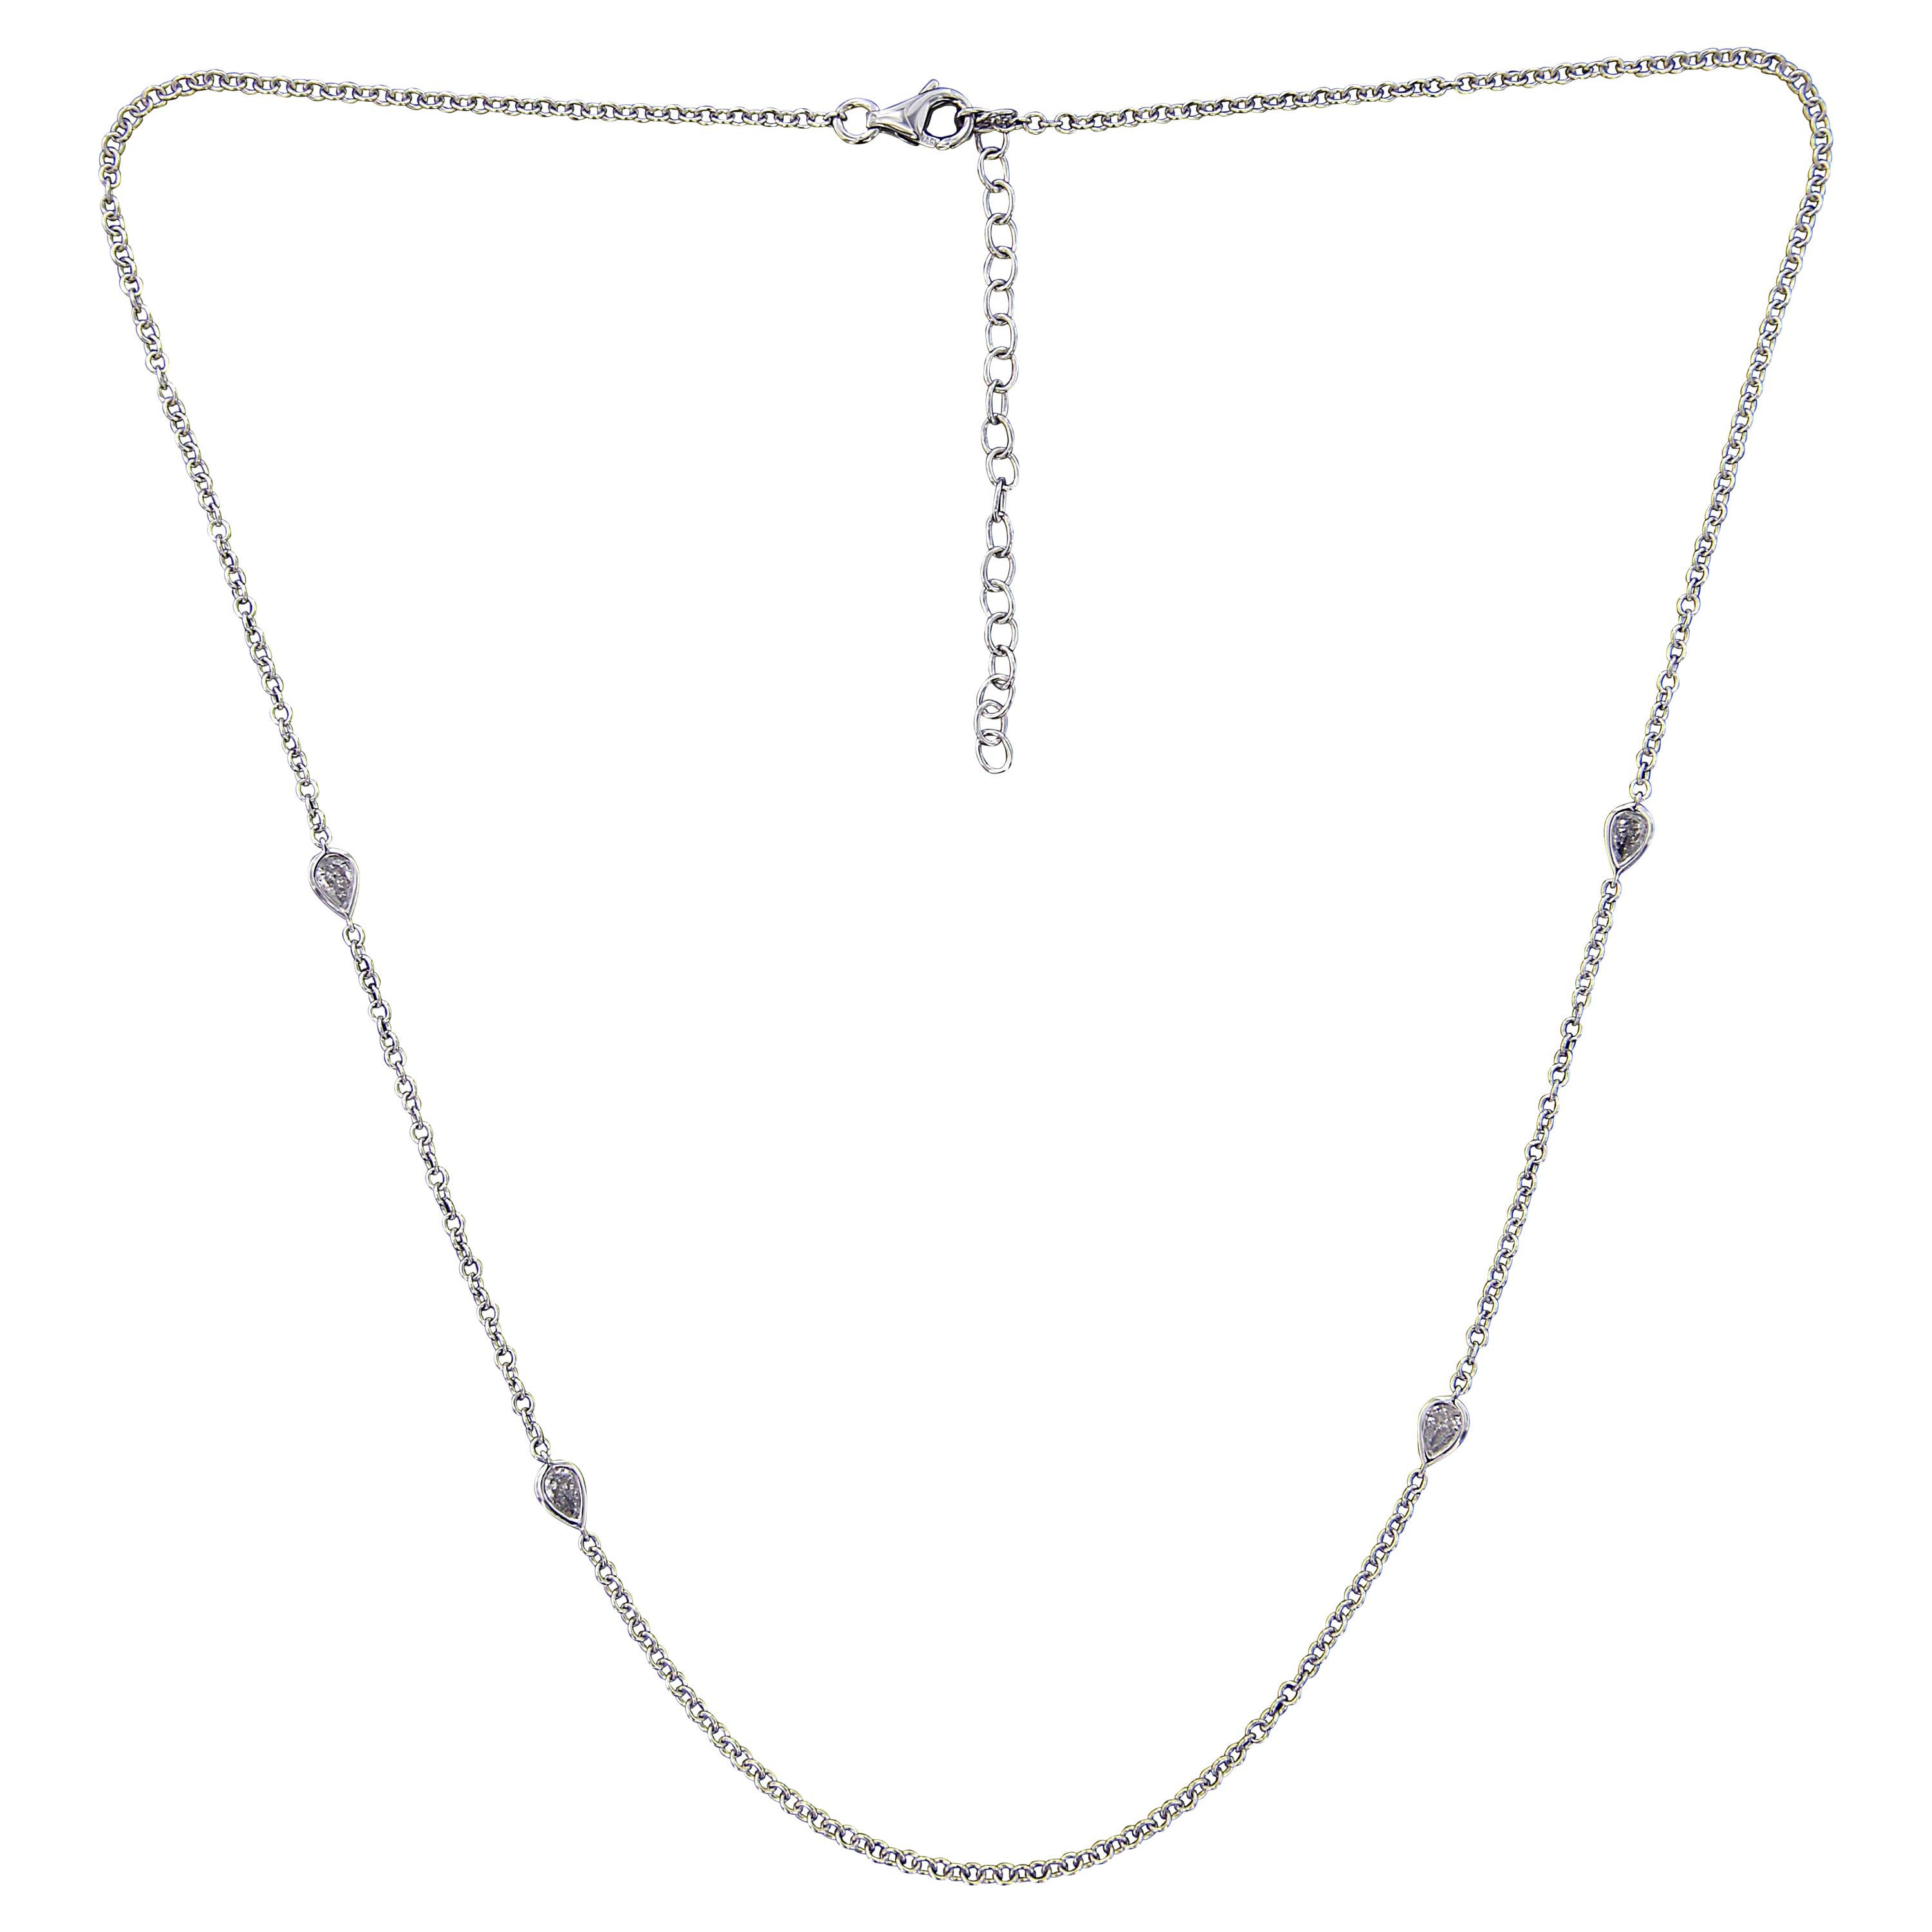 Sublime 18 Karat White Gold and Diamond Link Necklace